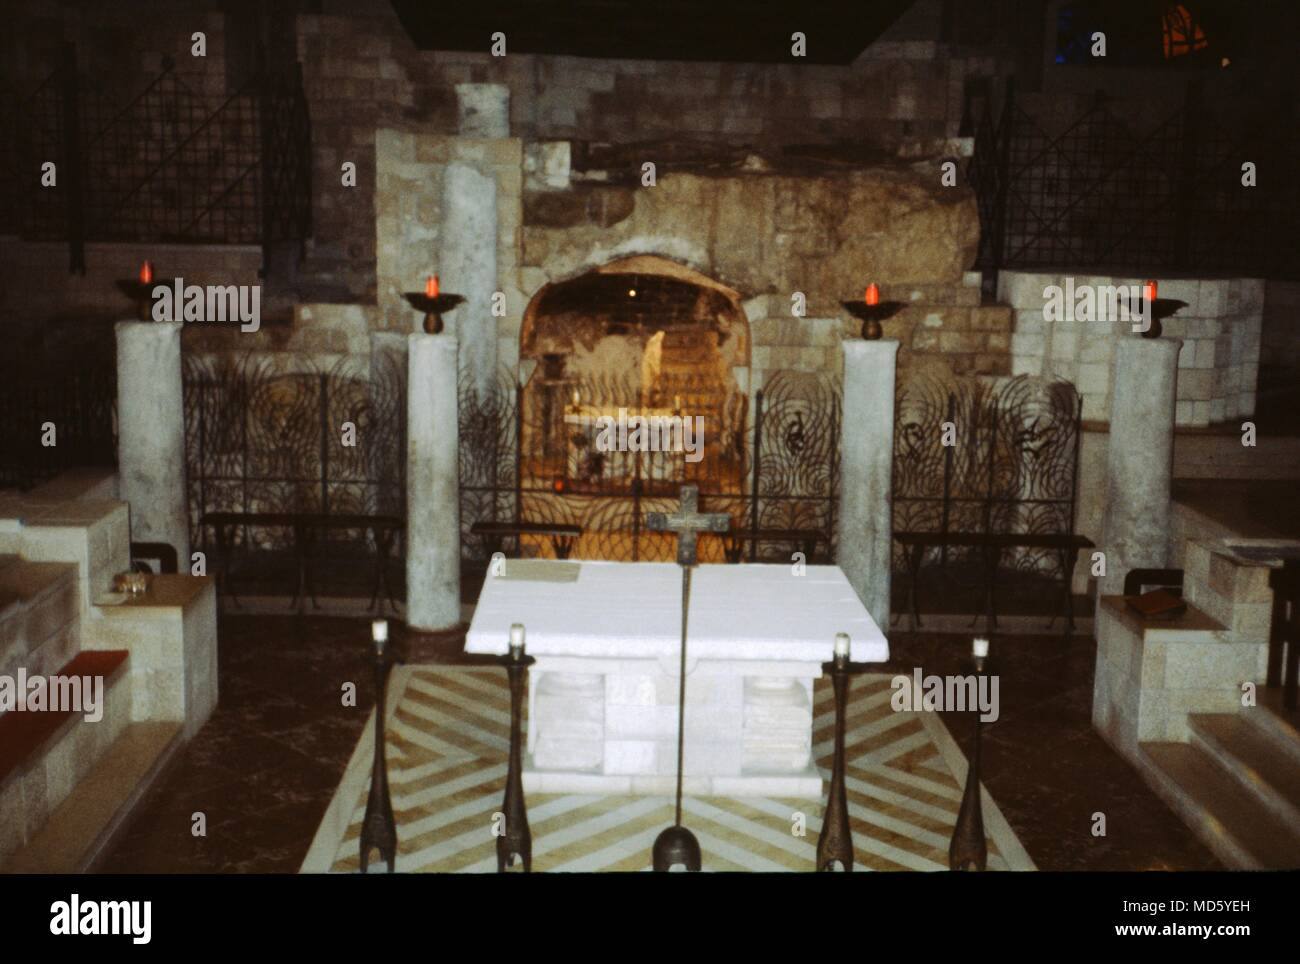 A gated off area that contains religious relics inside the dimly lit interior of a church, 1975. () Stock Photo